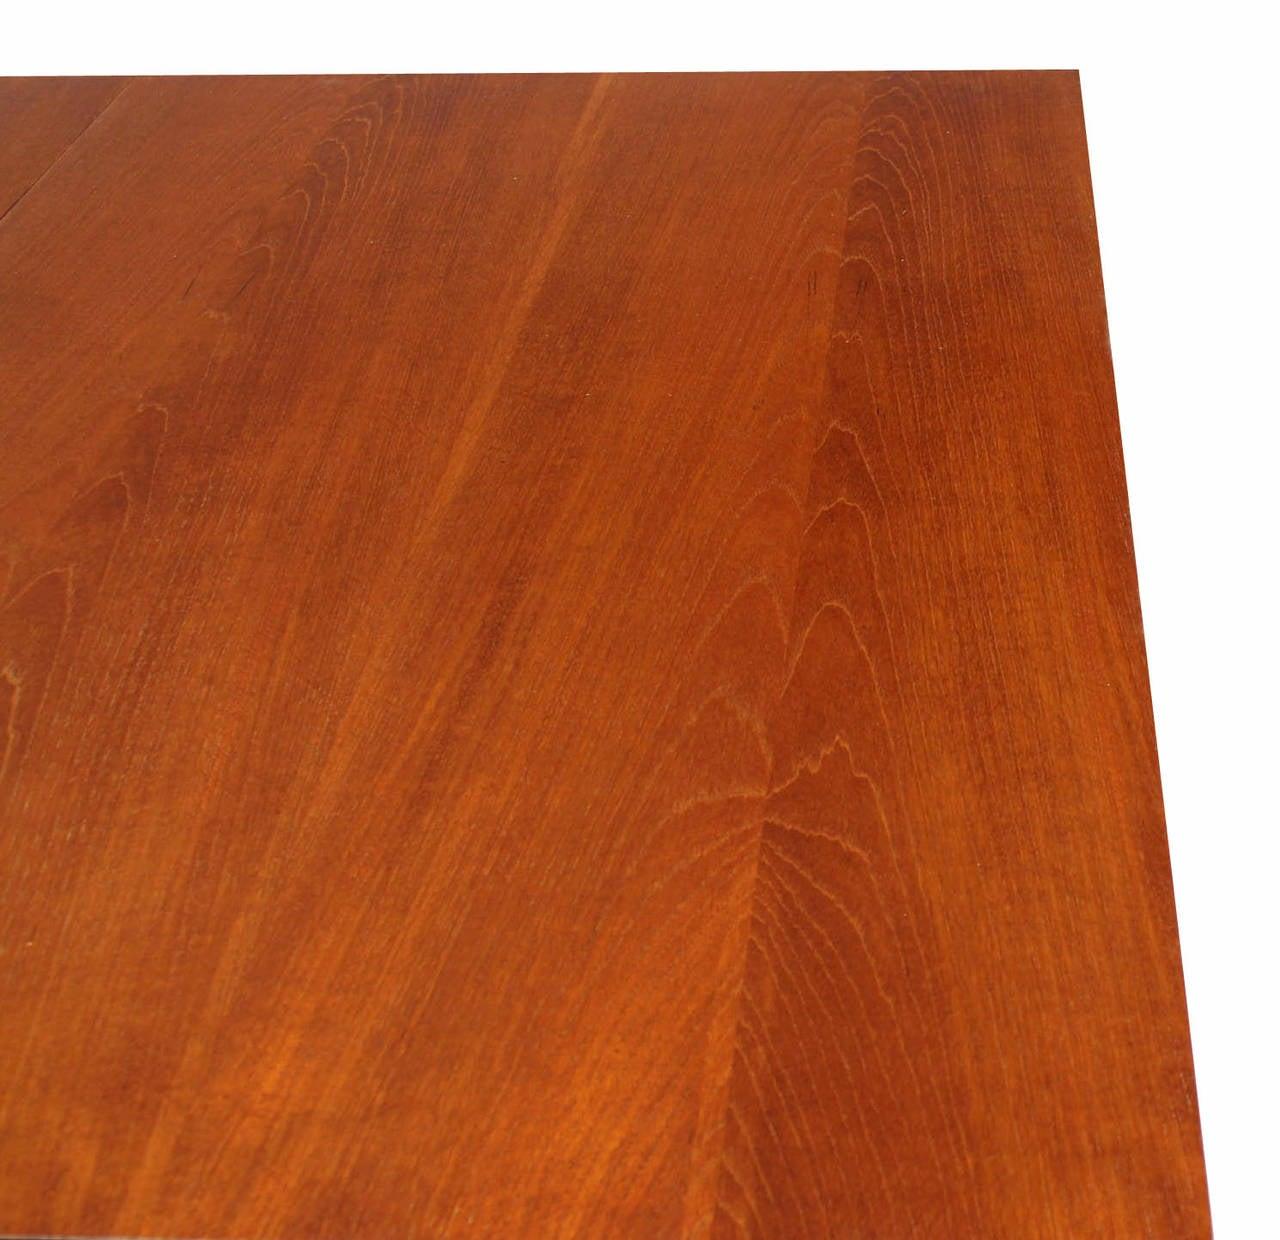 Lacquered Danish Mid Century Modern Teak Tapered Legs Dining Conference Table Two Leaves  For Sale